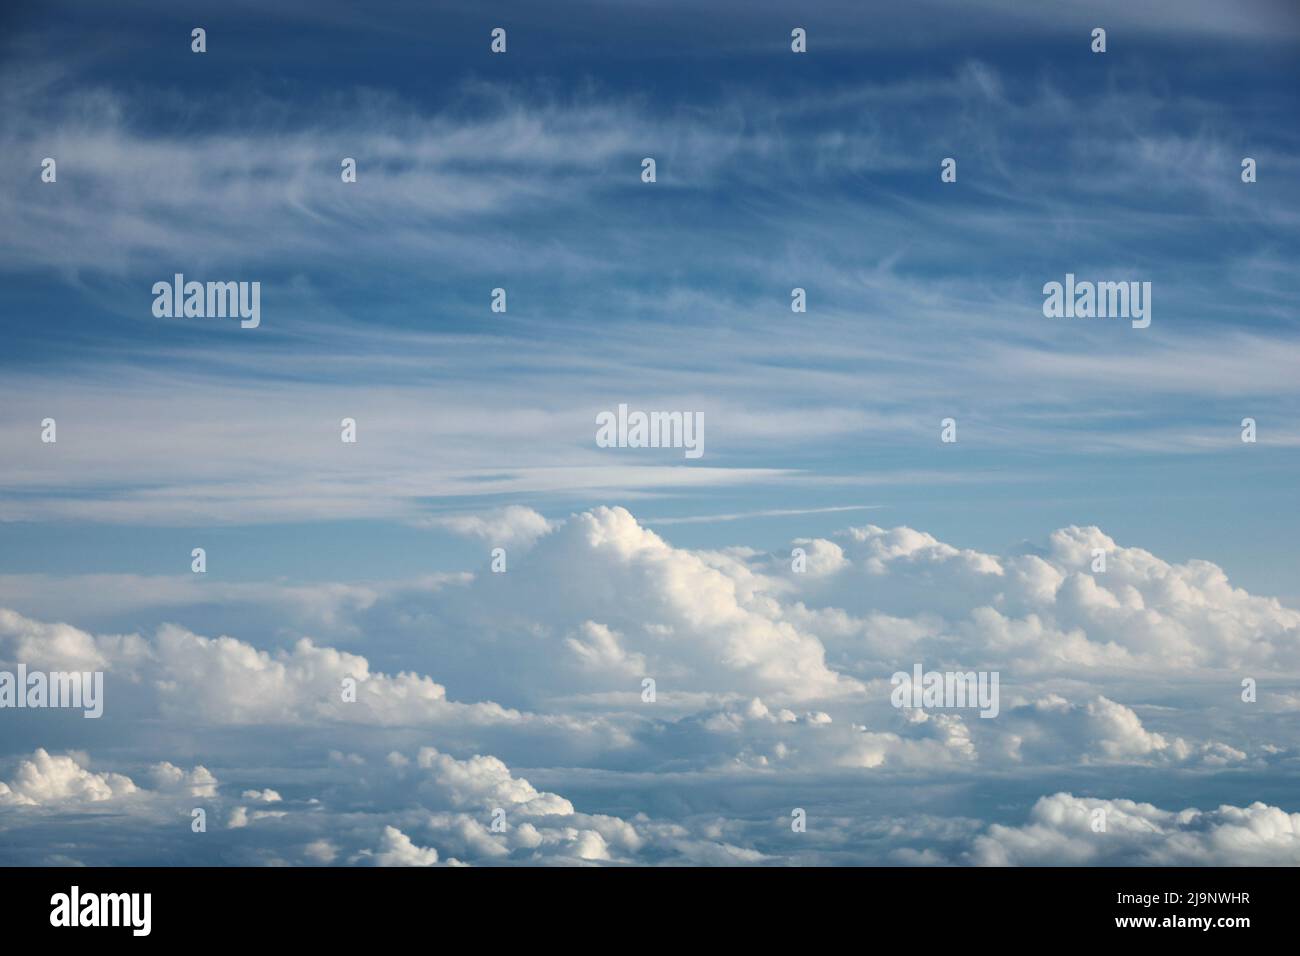 A landscape of large clouds in the sky Stock Photo